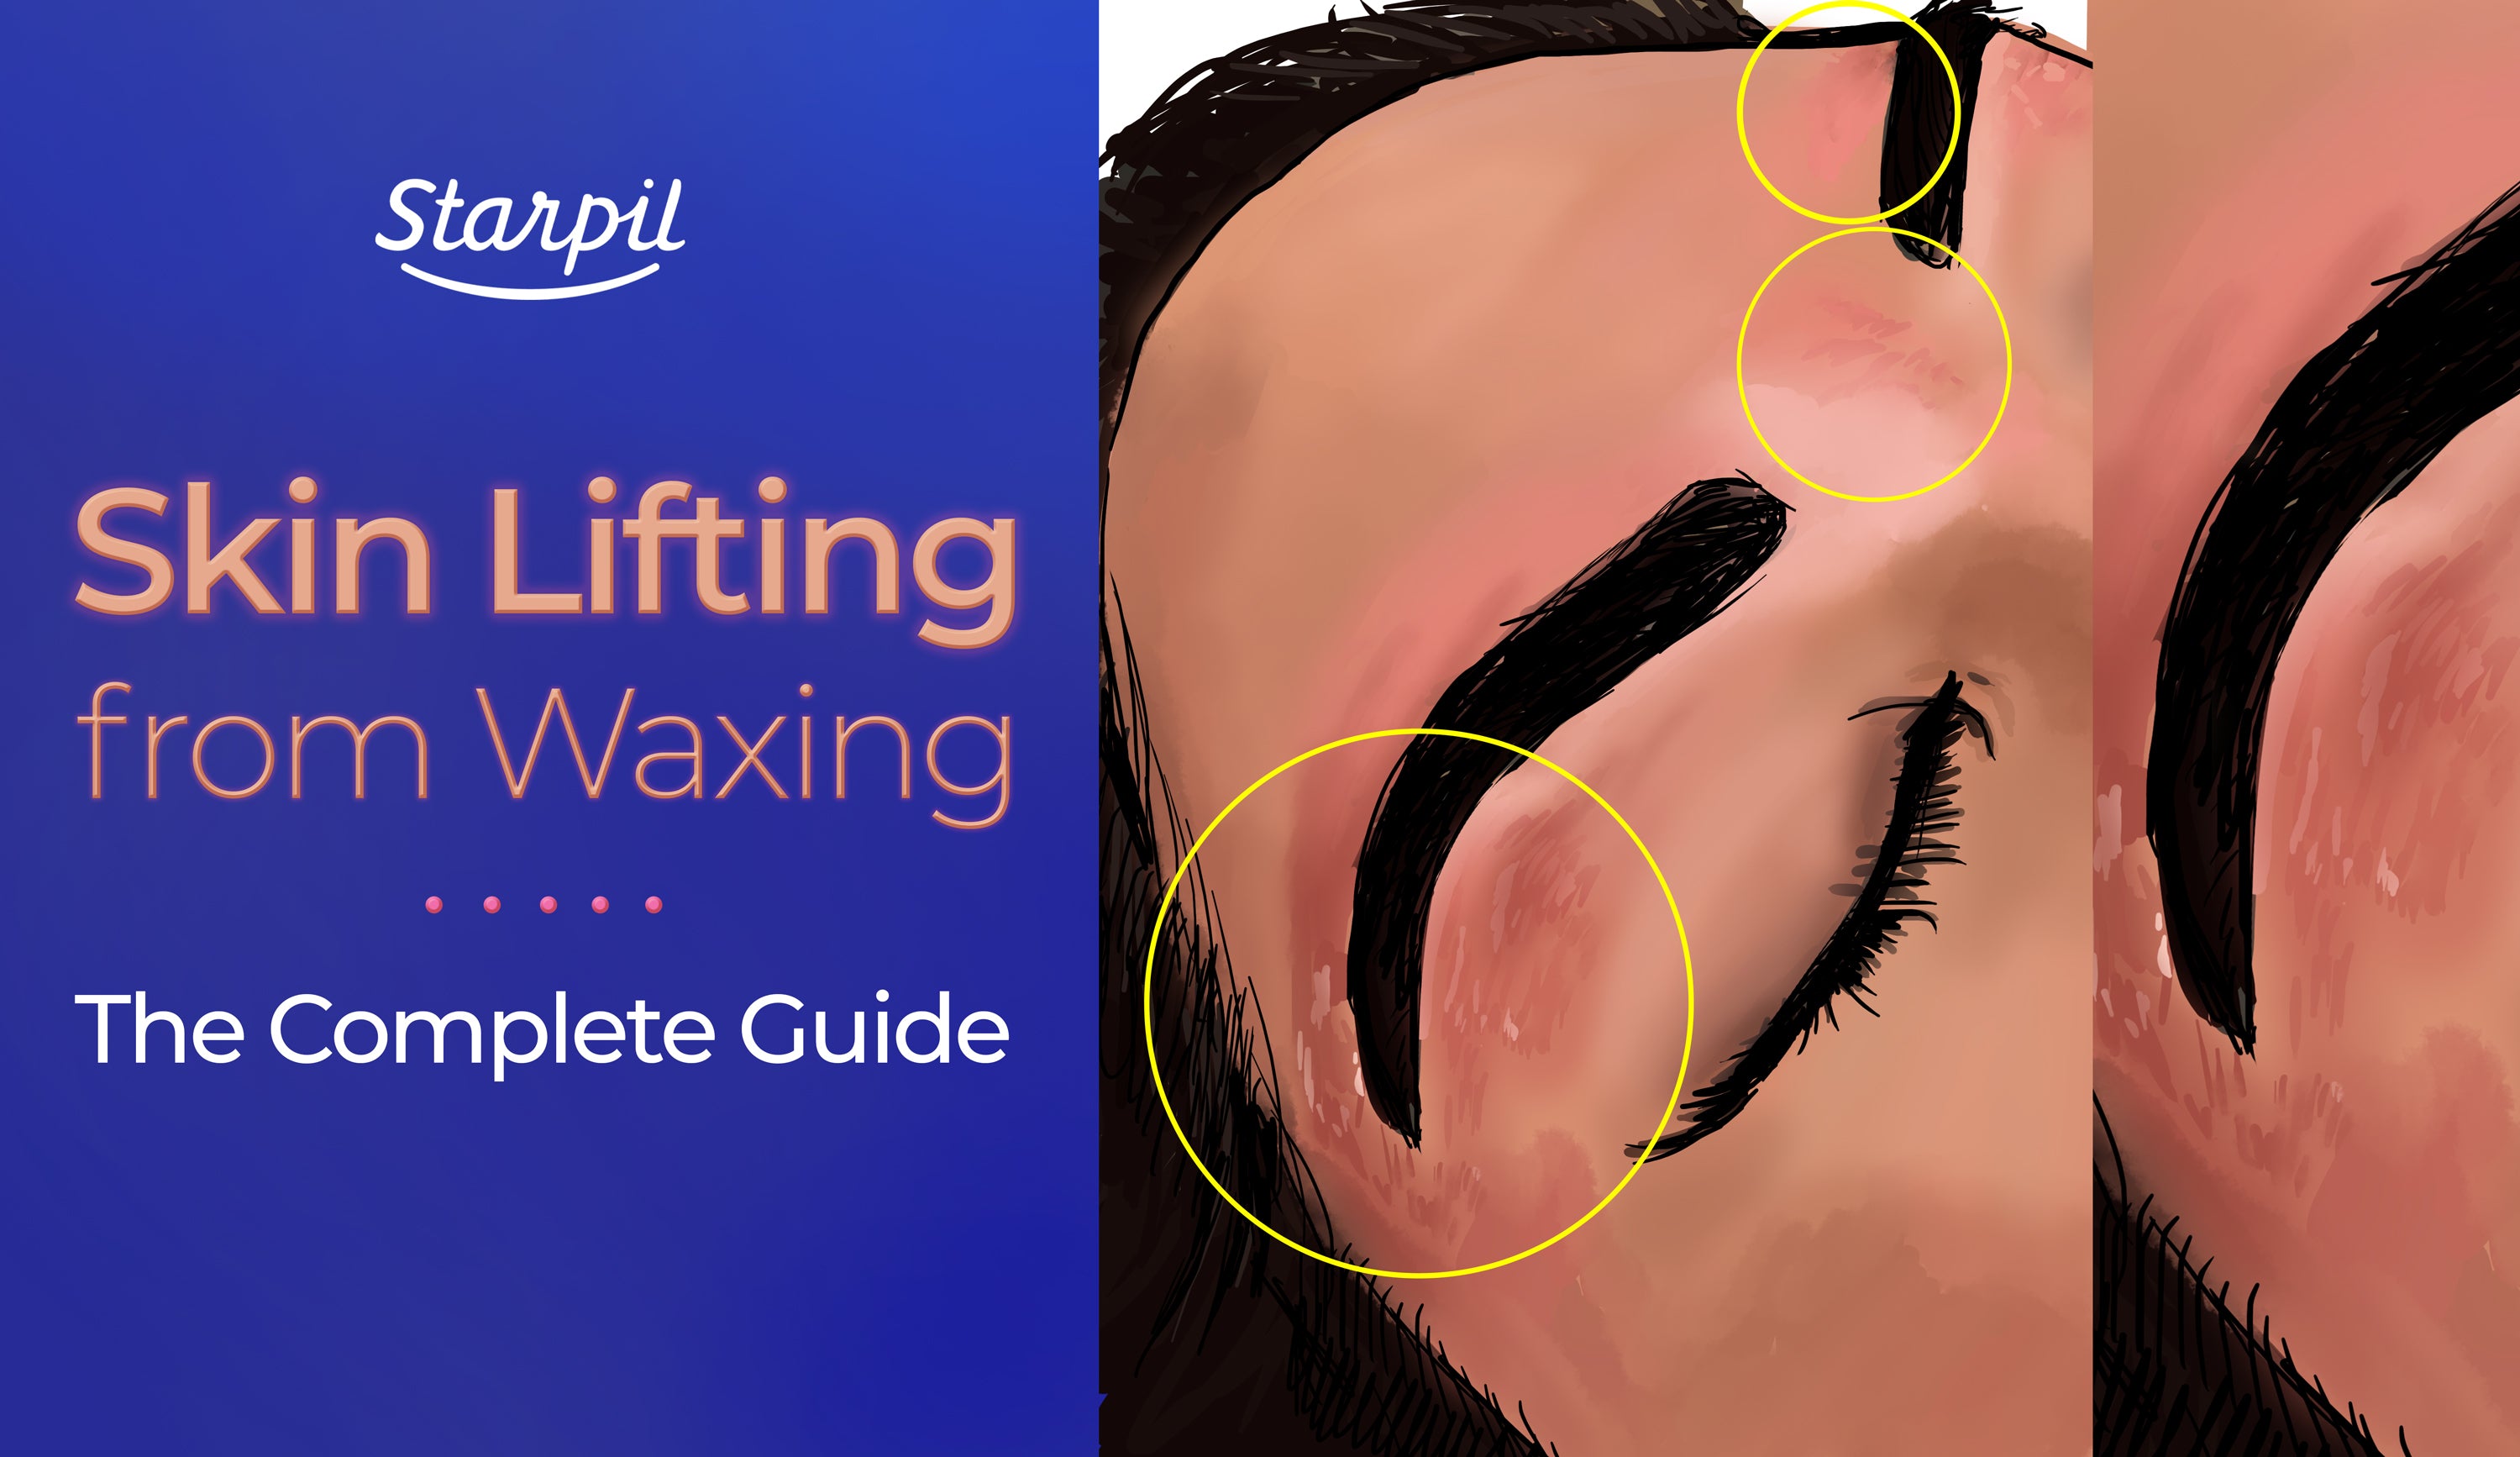 Skin Lifting from Waxing | The Complete Guide